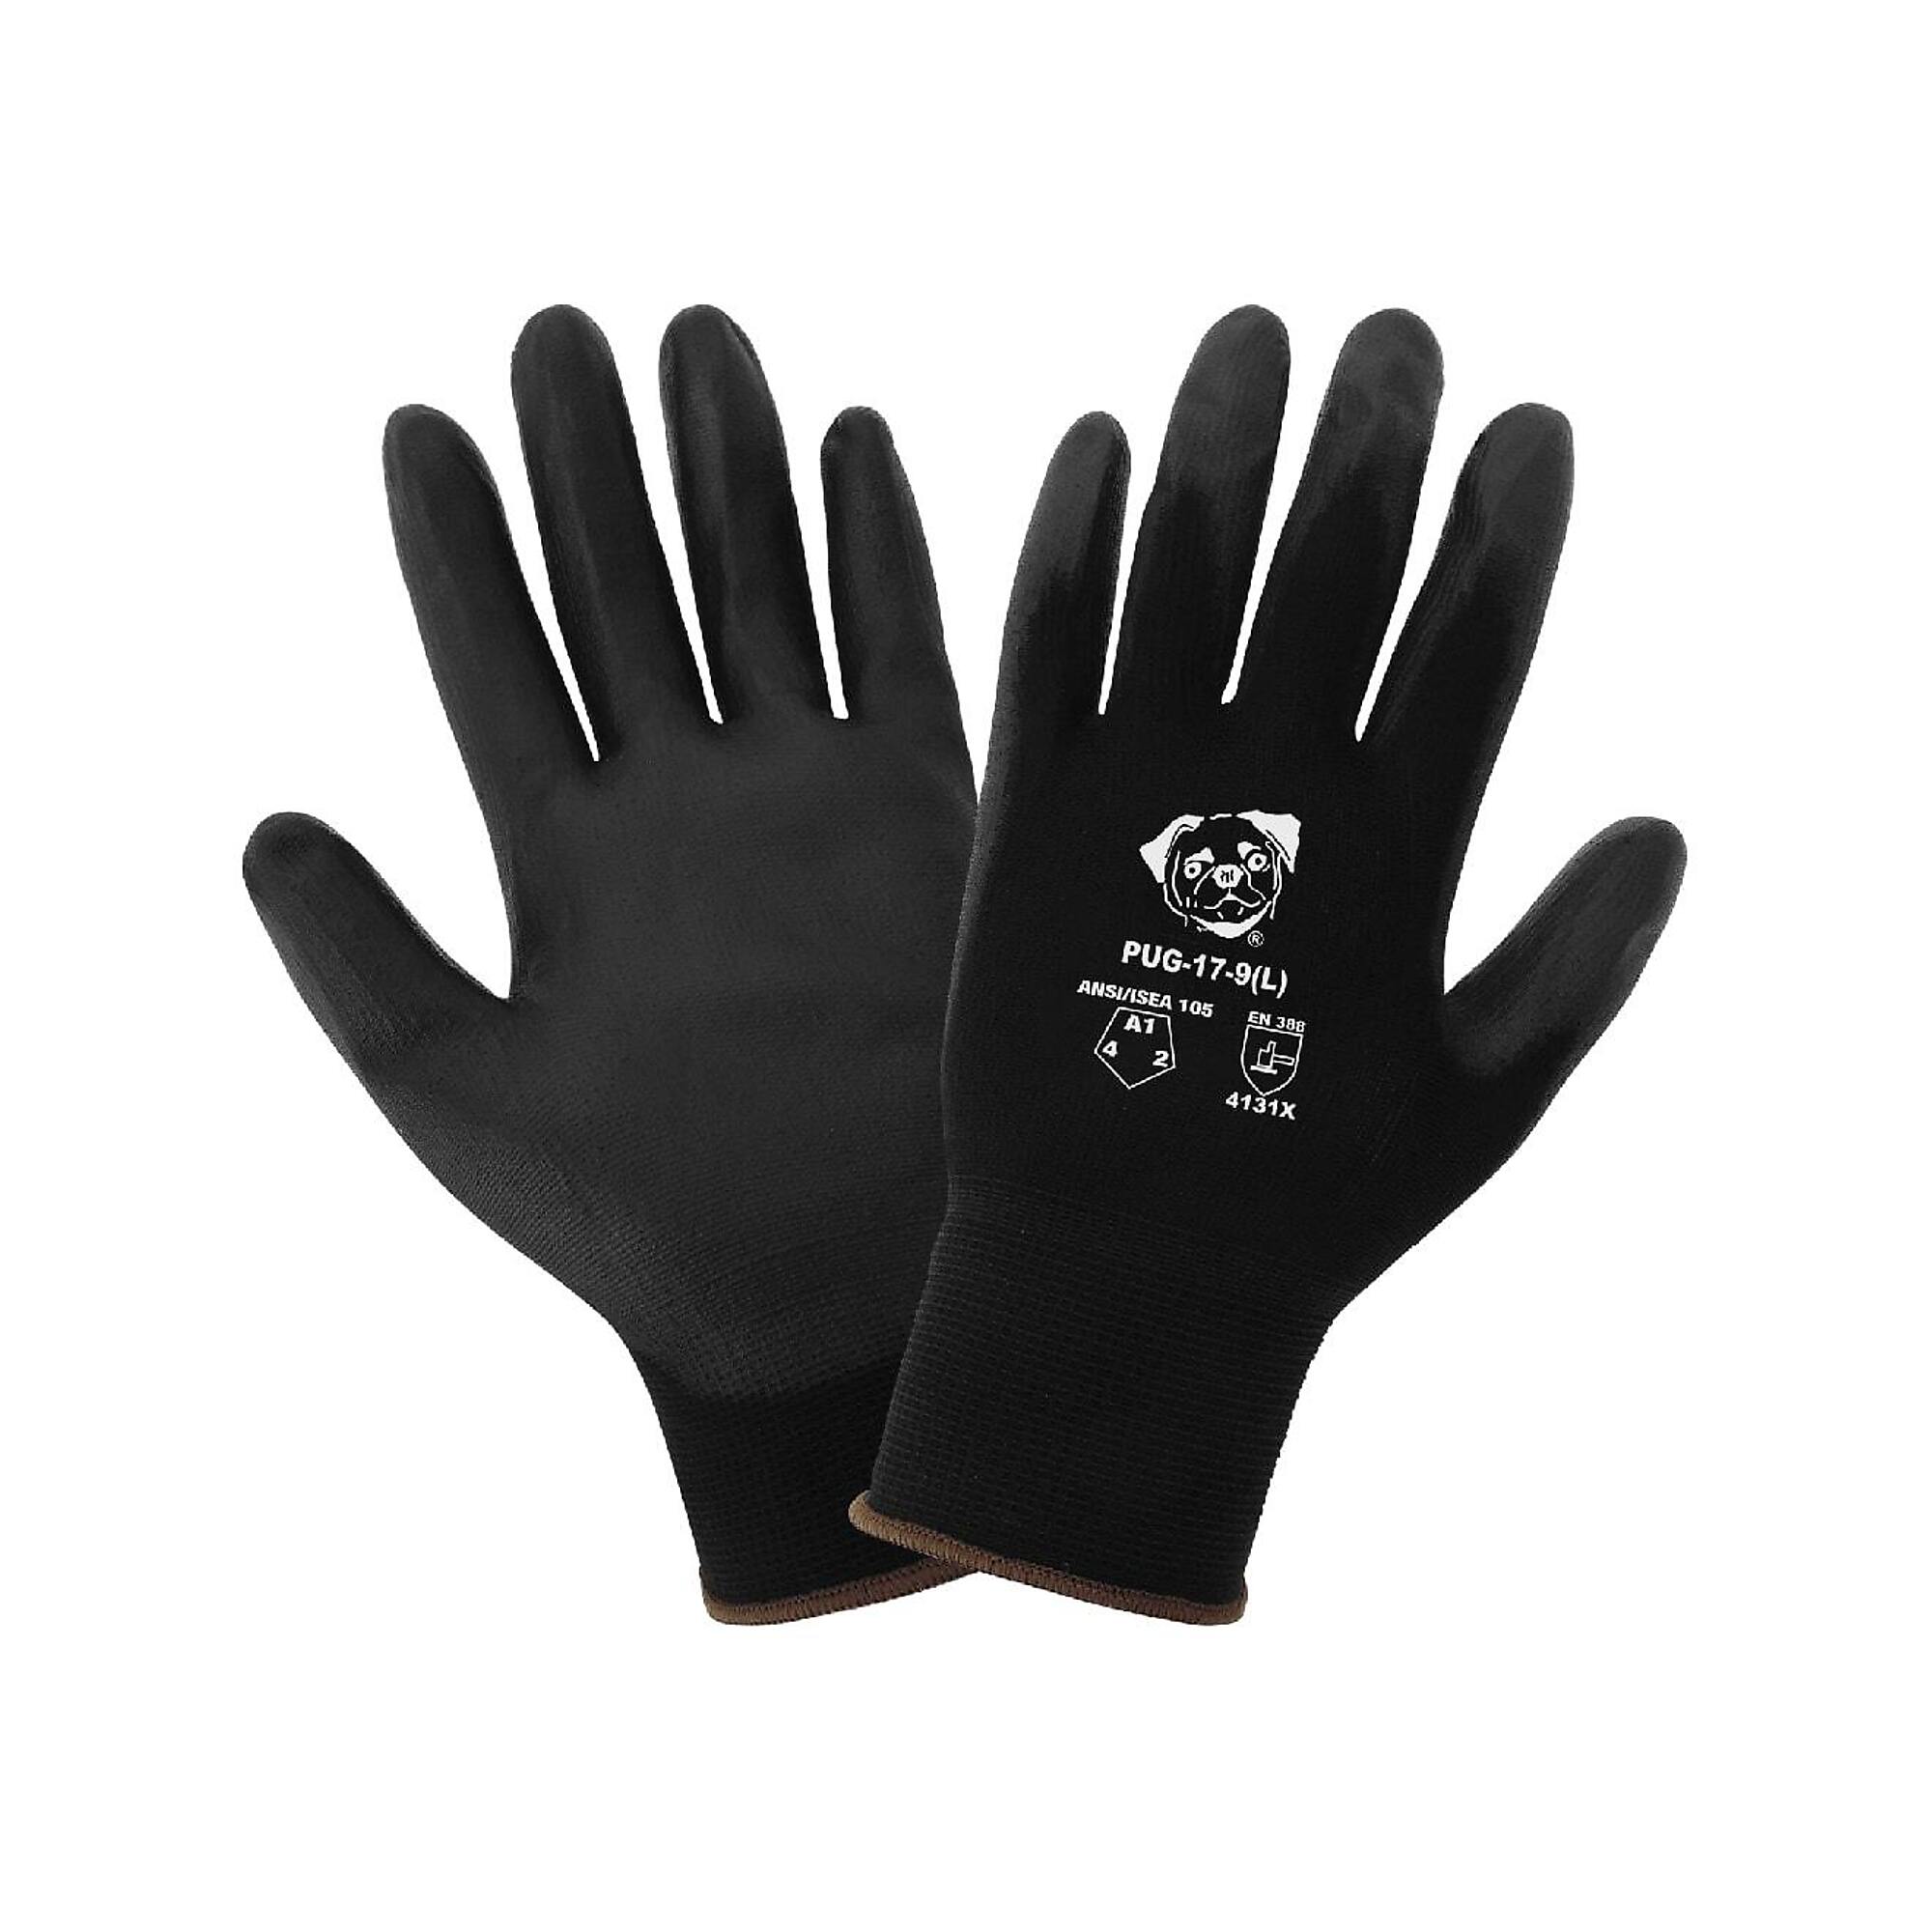 Global Glove PUG , Black, Poly Coated, Cut Resistant A1 Gloves - 12 Pairs, Size M, Color Black, Included (qty.) 12 Model PUG-17-8(M)